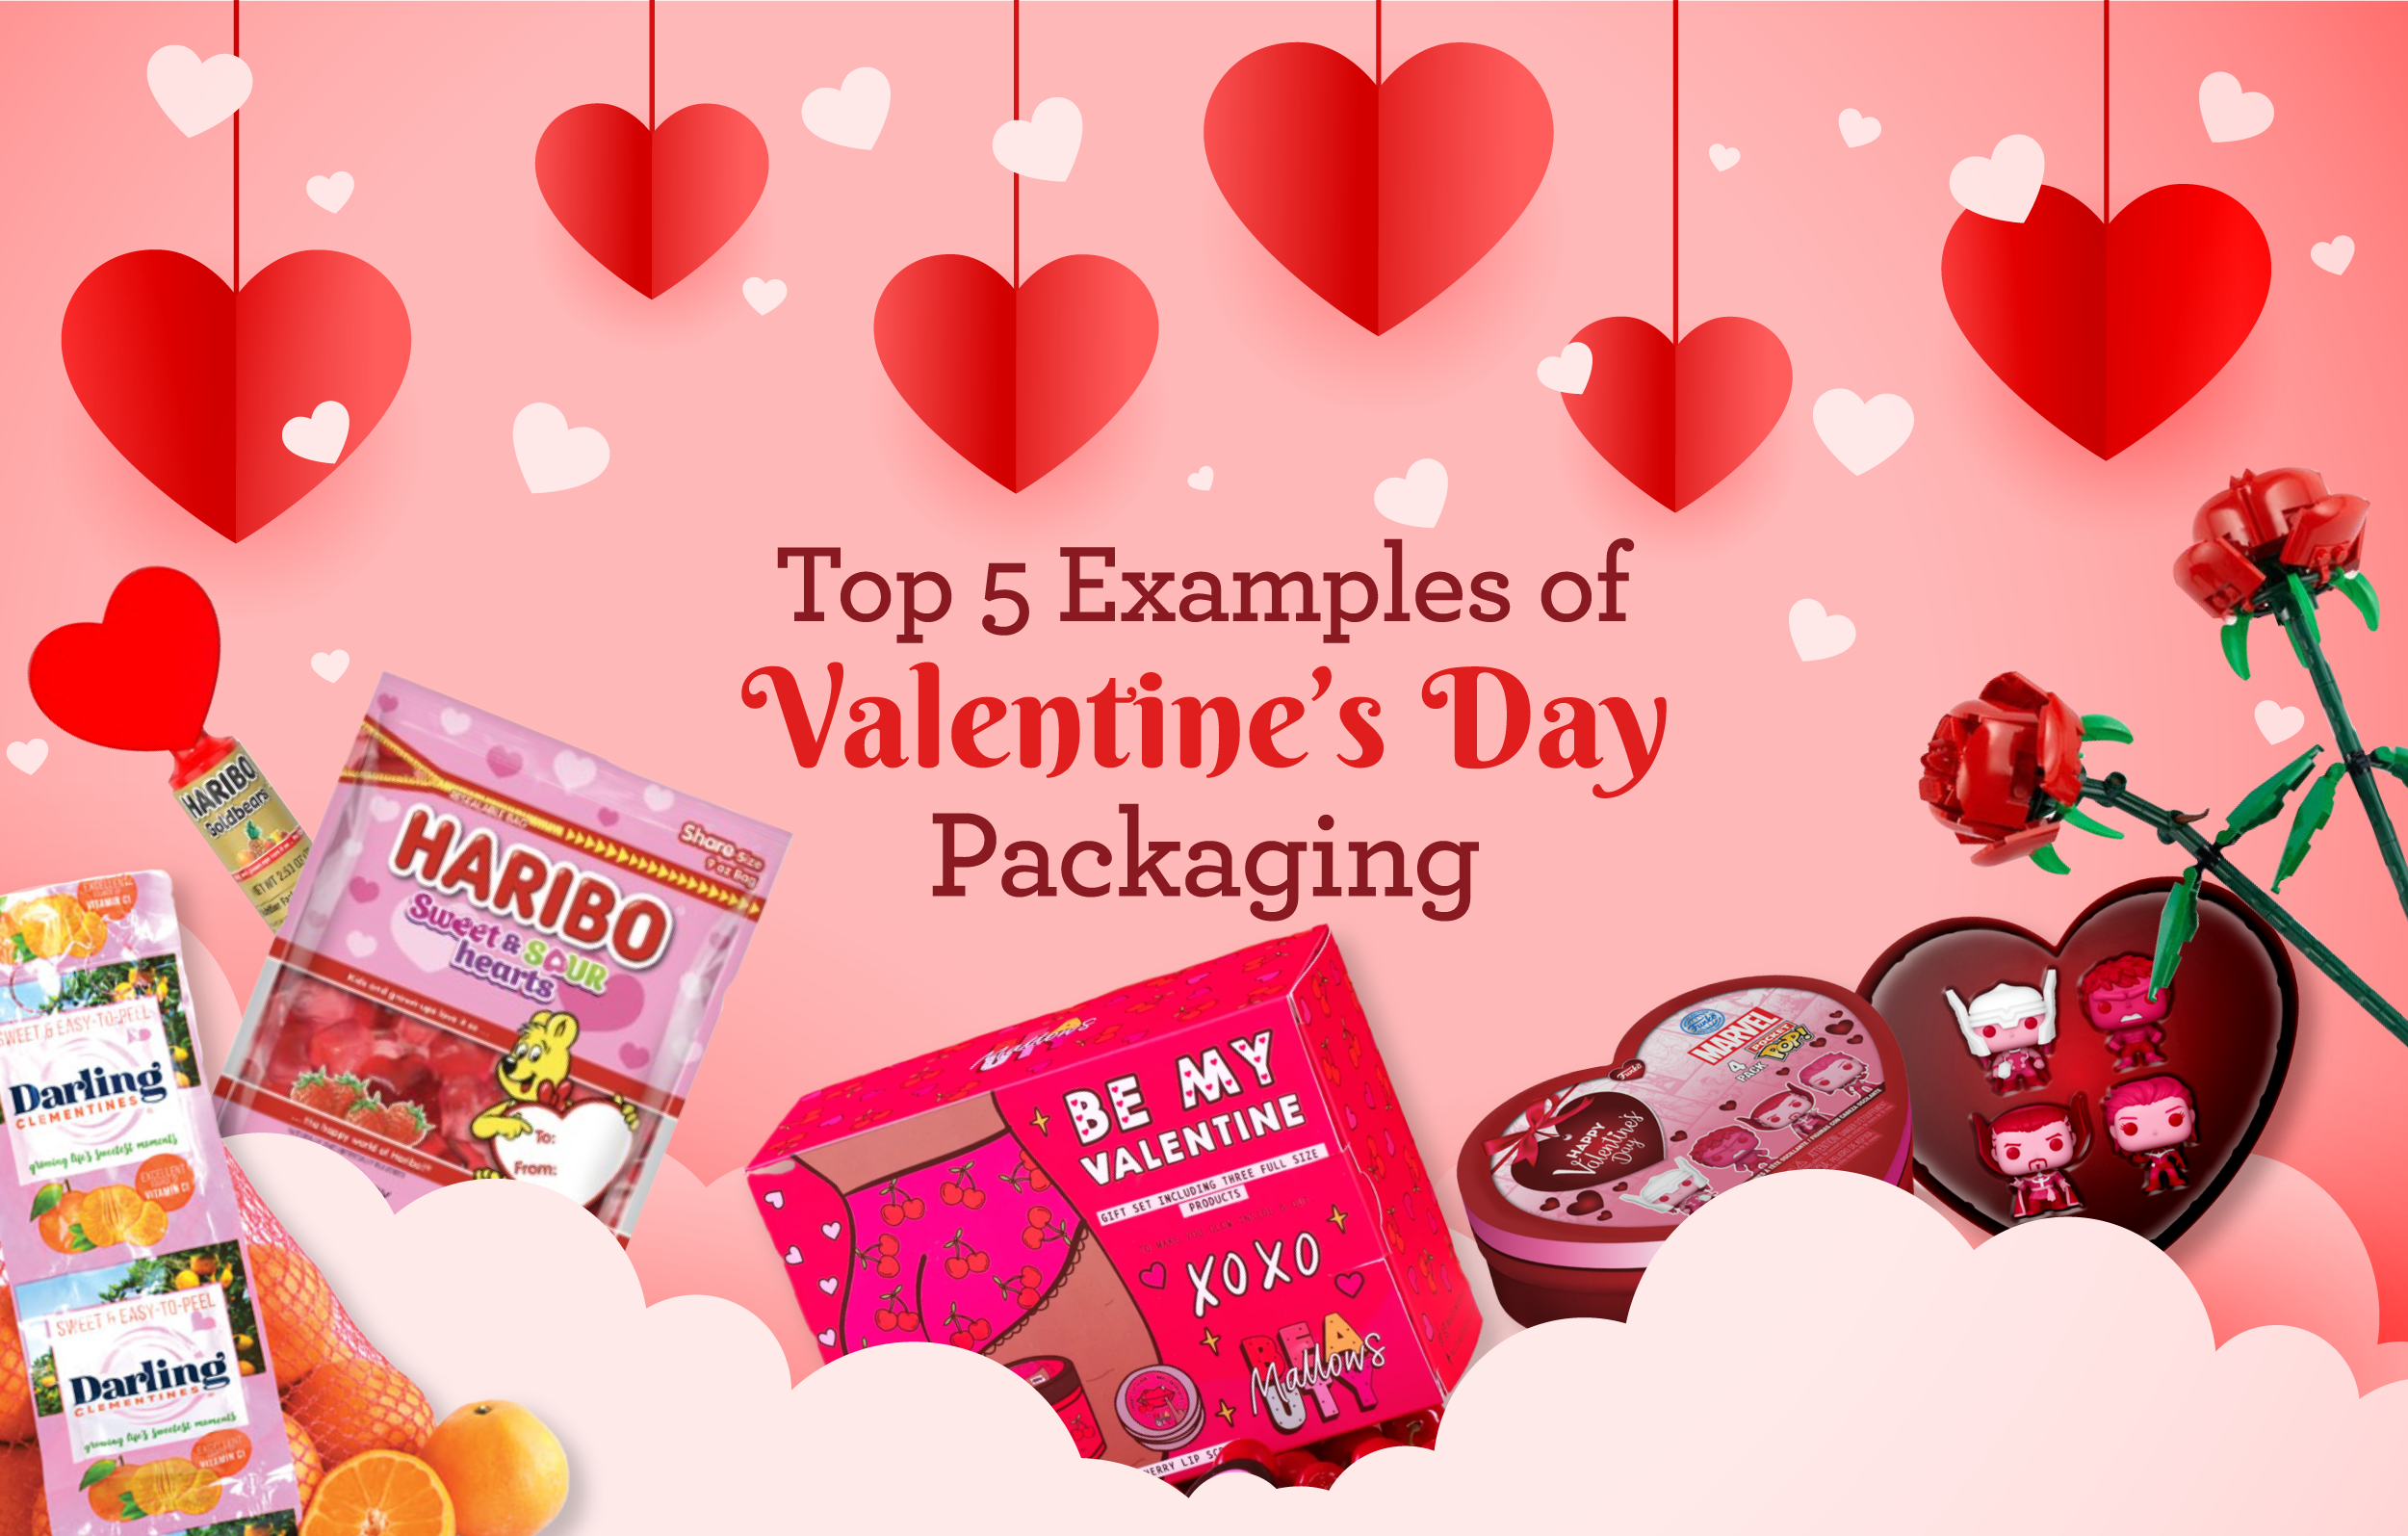 Valentine’s Day Packaging